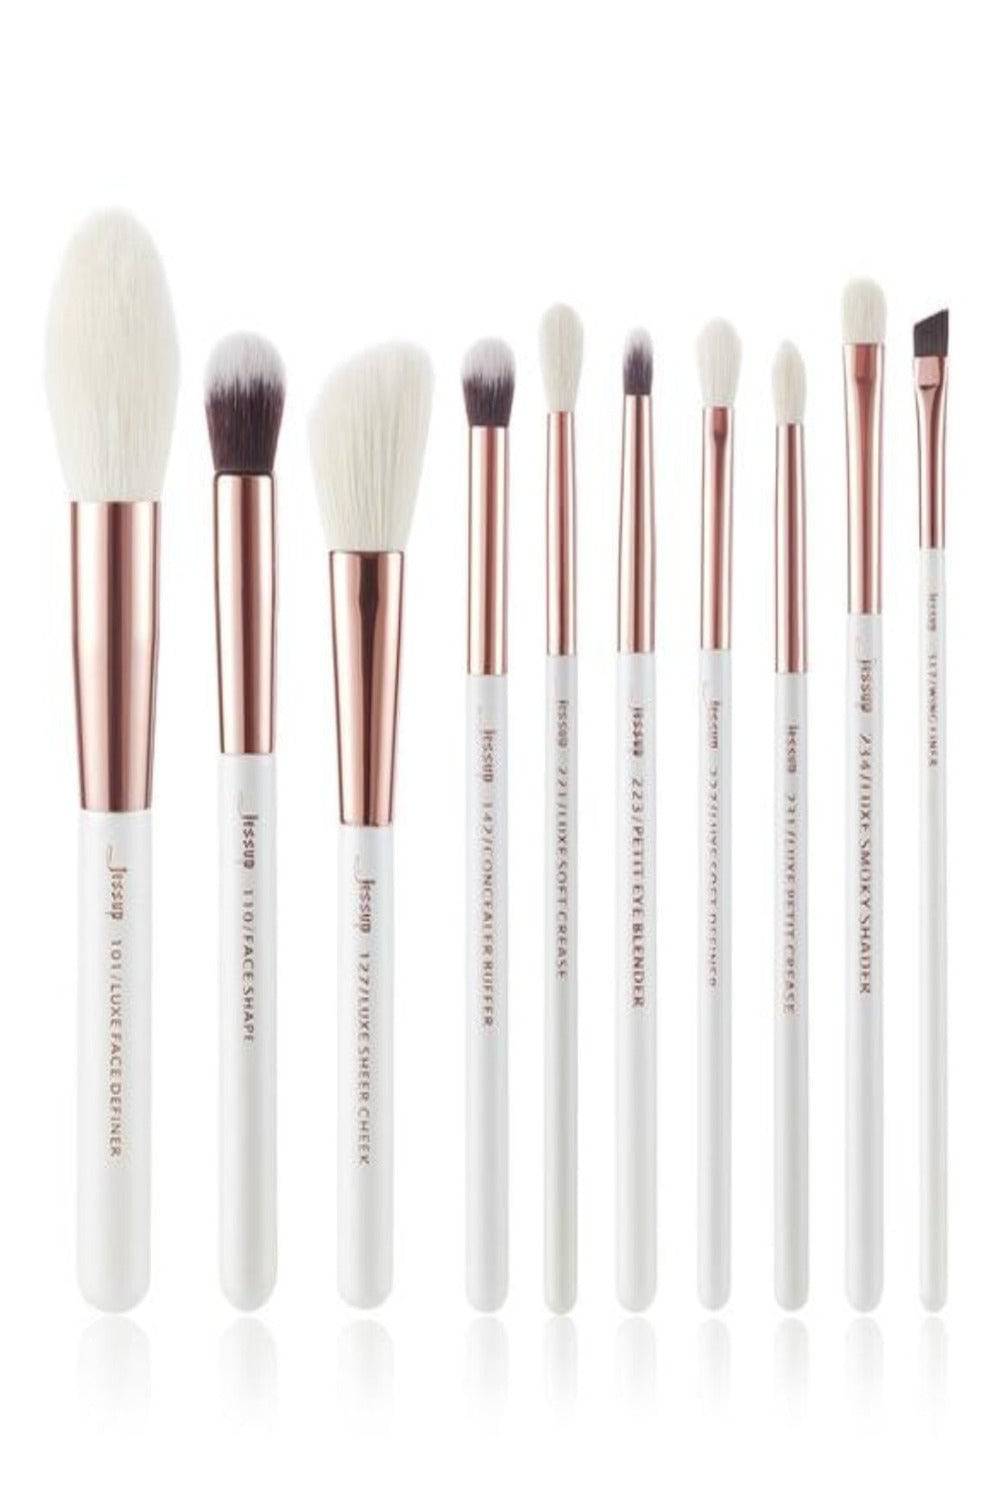 Girl On The Go Professional Makeup Brush Set - 10 Pack - TGC Boutique - Makeup Brushes